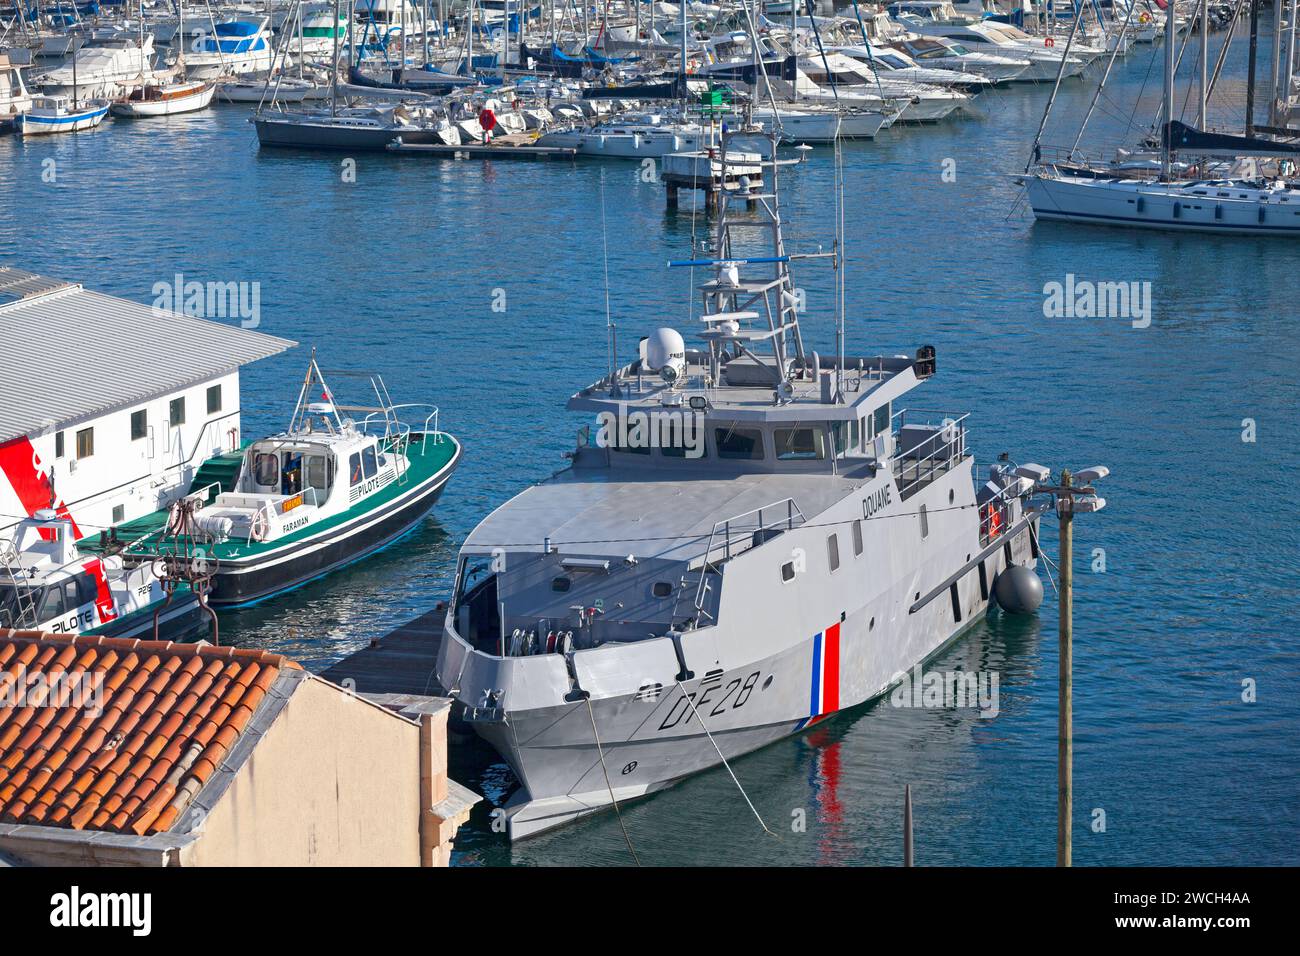 Marseille, France - March 22 2019: Boat of the Douane (Customs) moored in the marina. Stock Photo